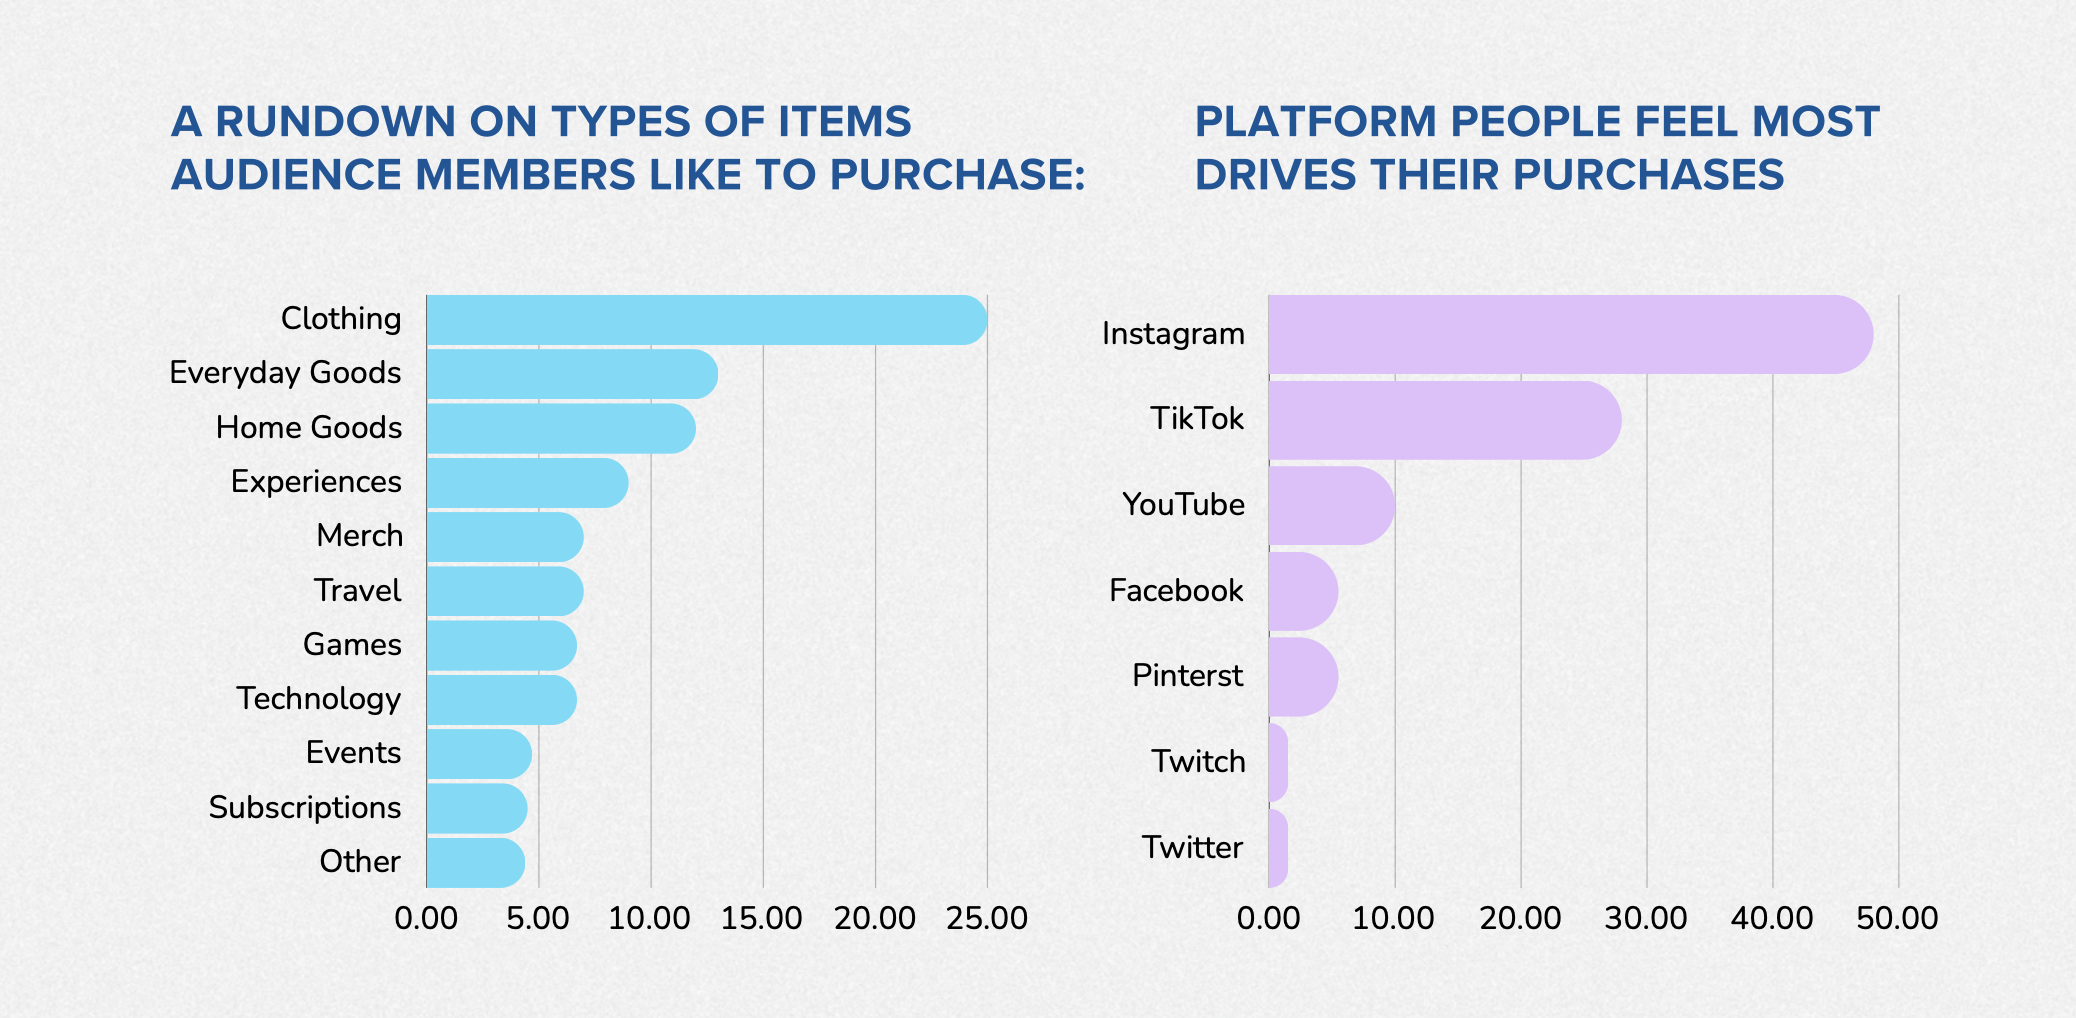 How social media impacts purchasing decisions